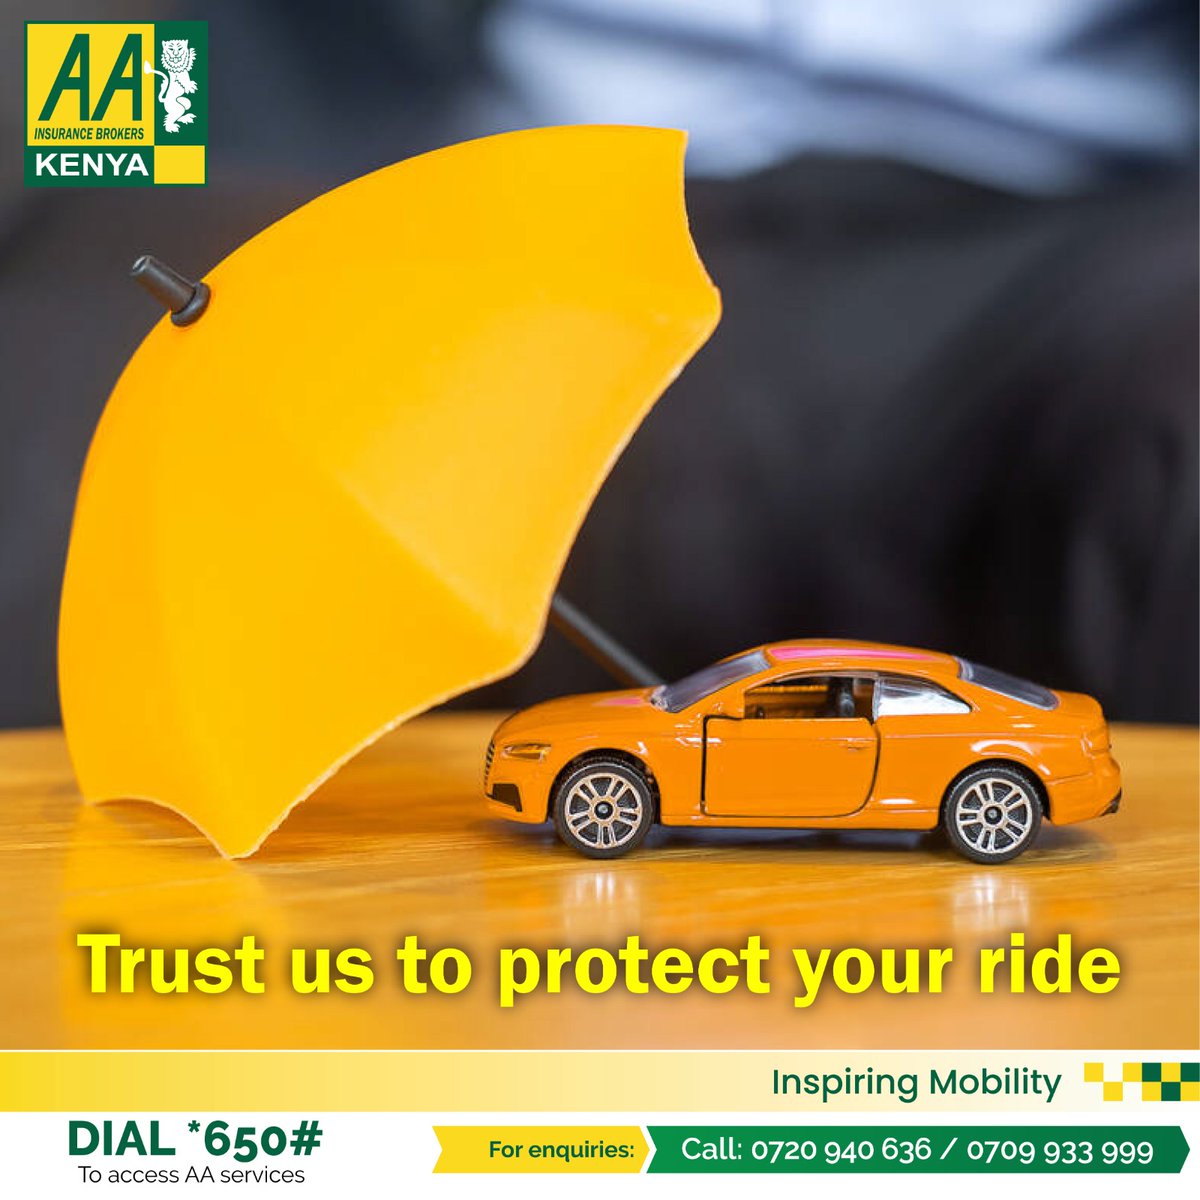 Don't let an accident derail your plans. Protect your vehicle with AAIB comprehensive motor insurance. Get a quote now, call us on 0720940636/0709933000
#AAIBCares #MotorInsurance